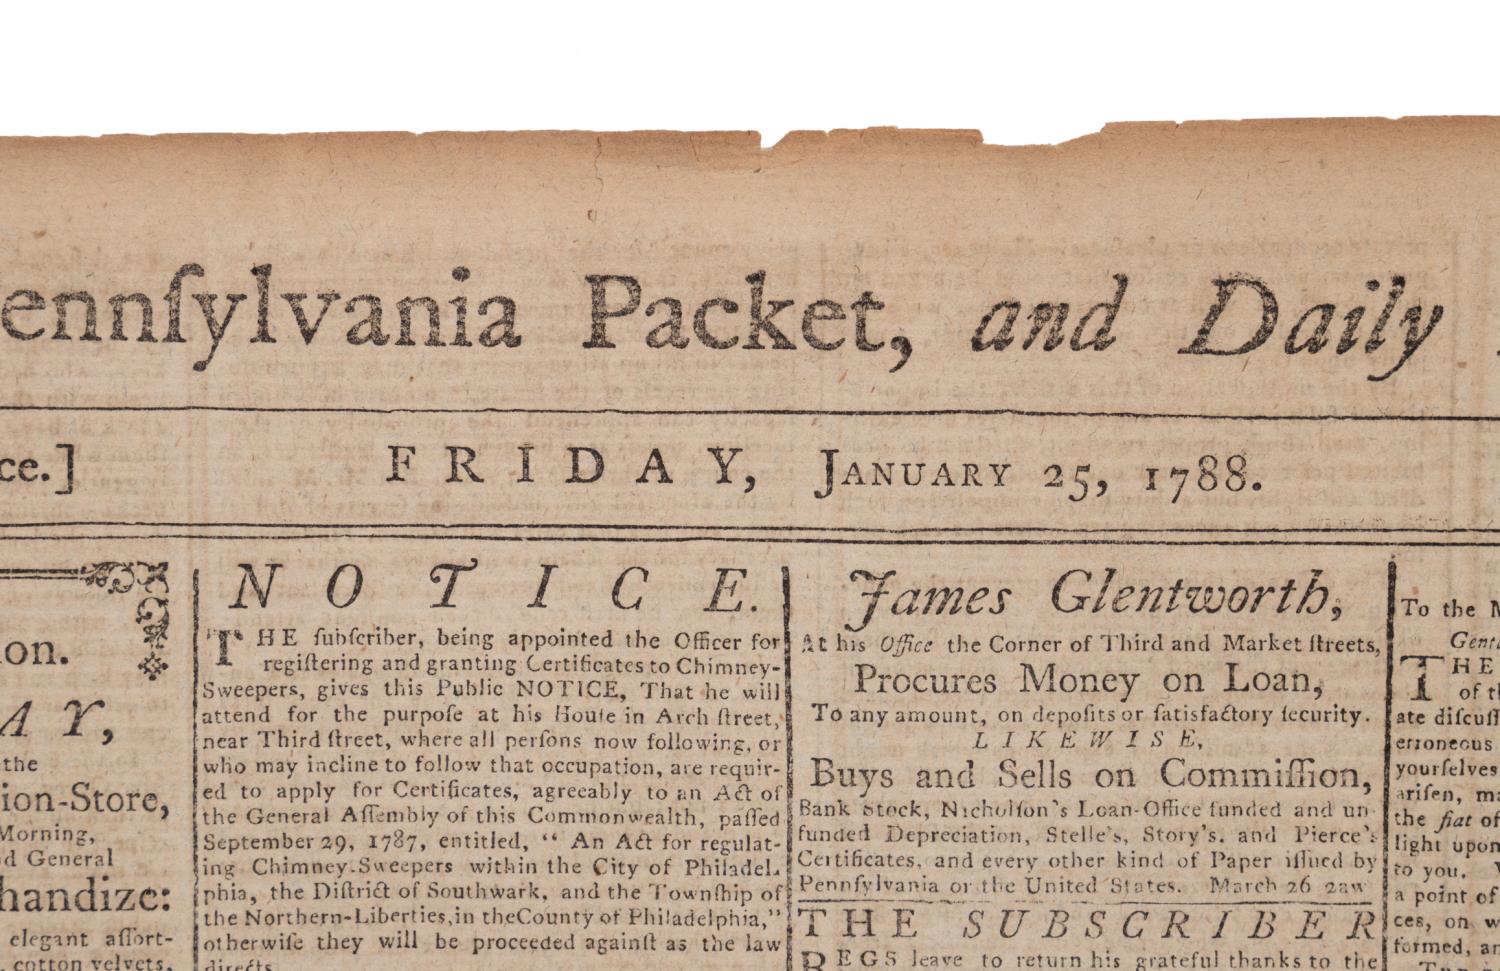 PENNSYLVANIA PACKET AND DAILY ADVERTISER, 1788 - Image 3 of 5